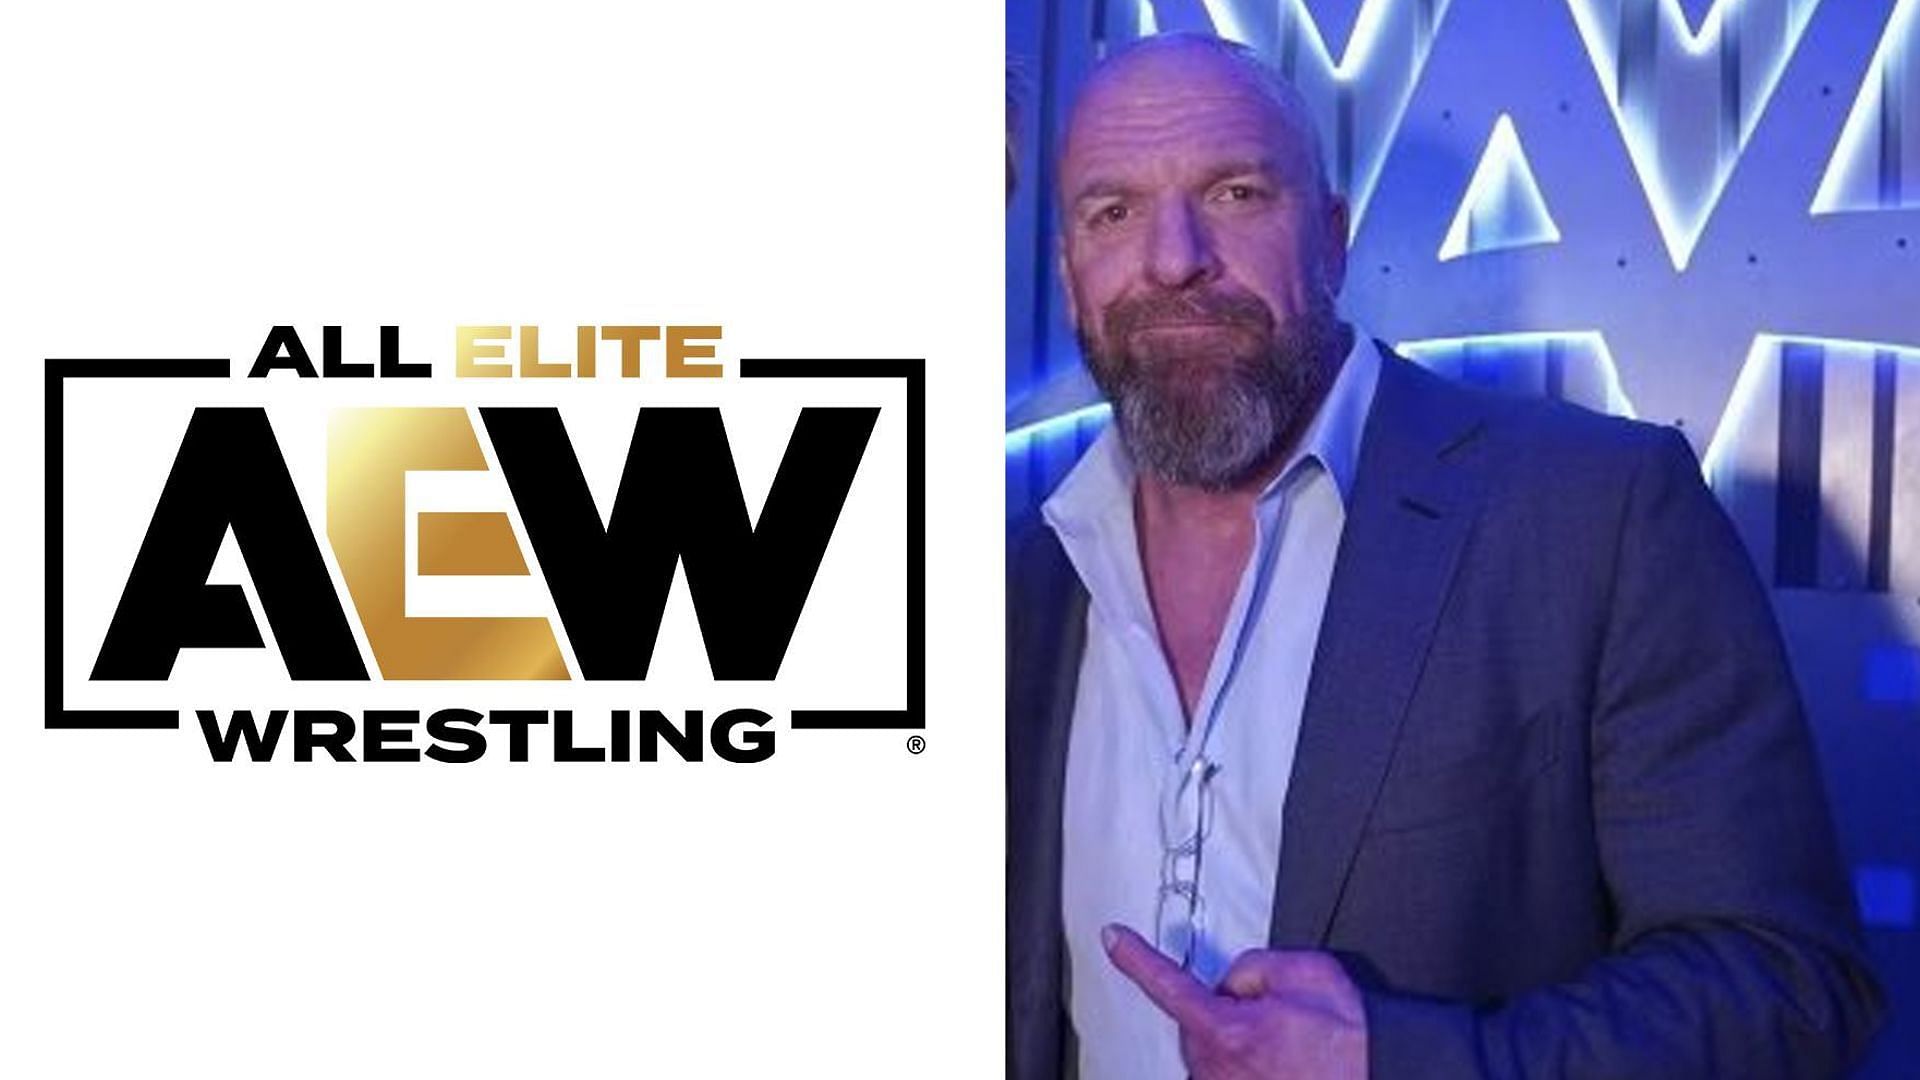 Triple H currently serves as WWE CCO who has brought AEW stars to WWE